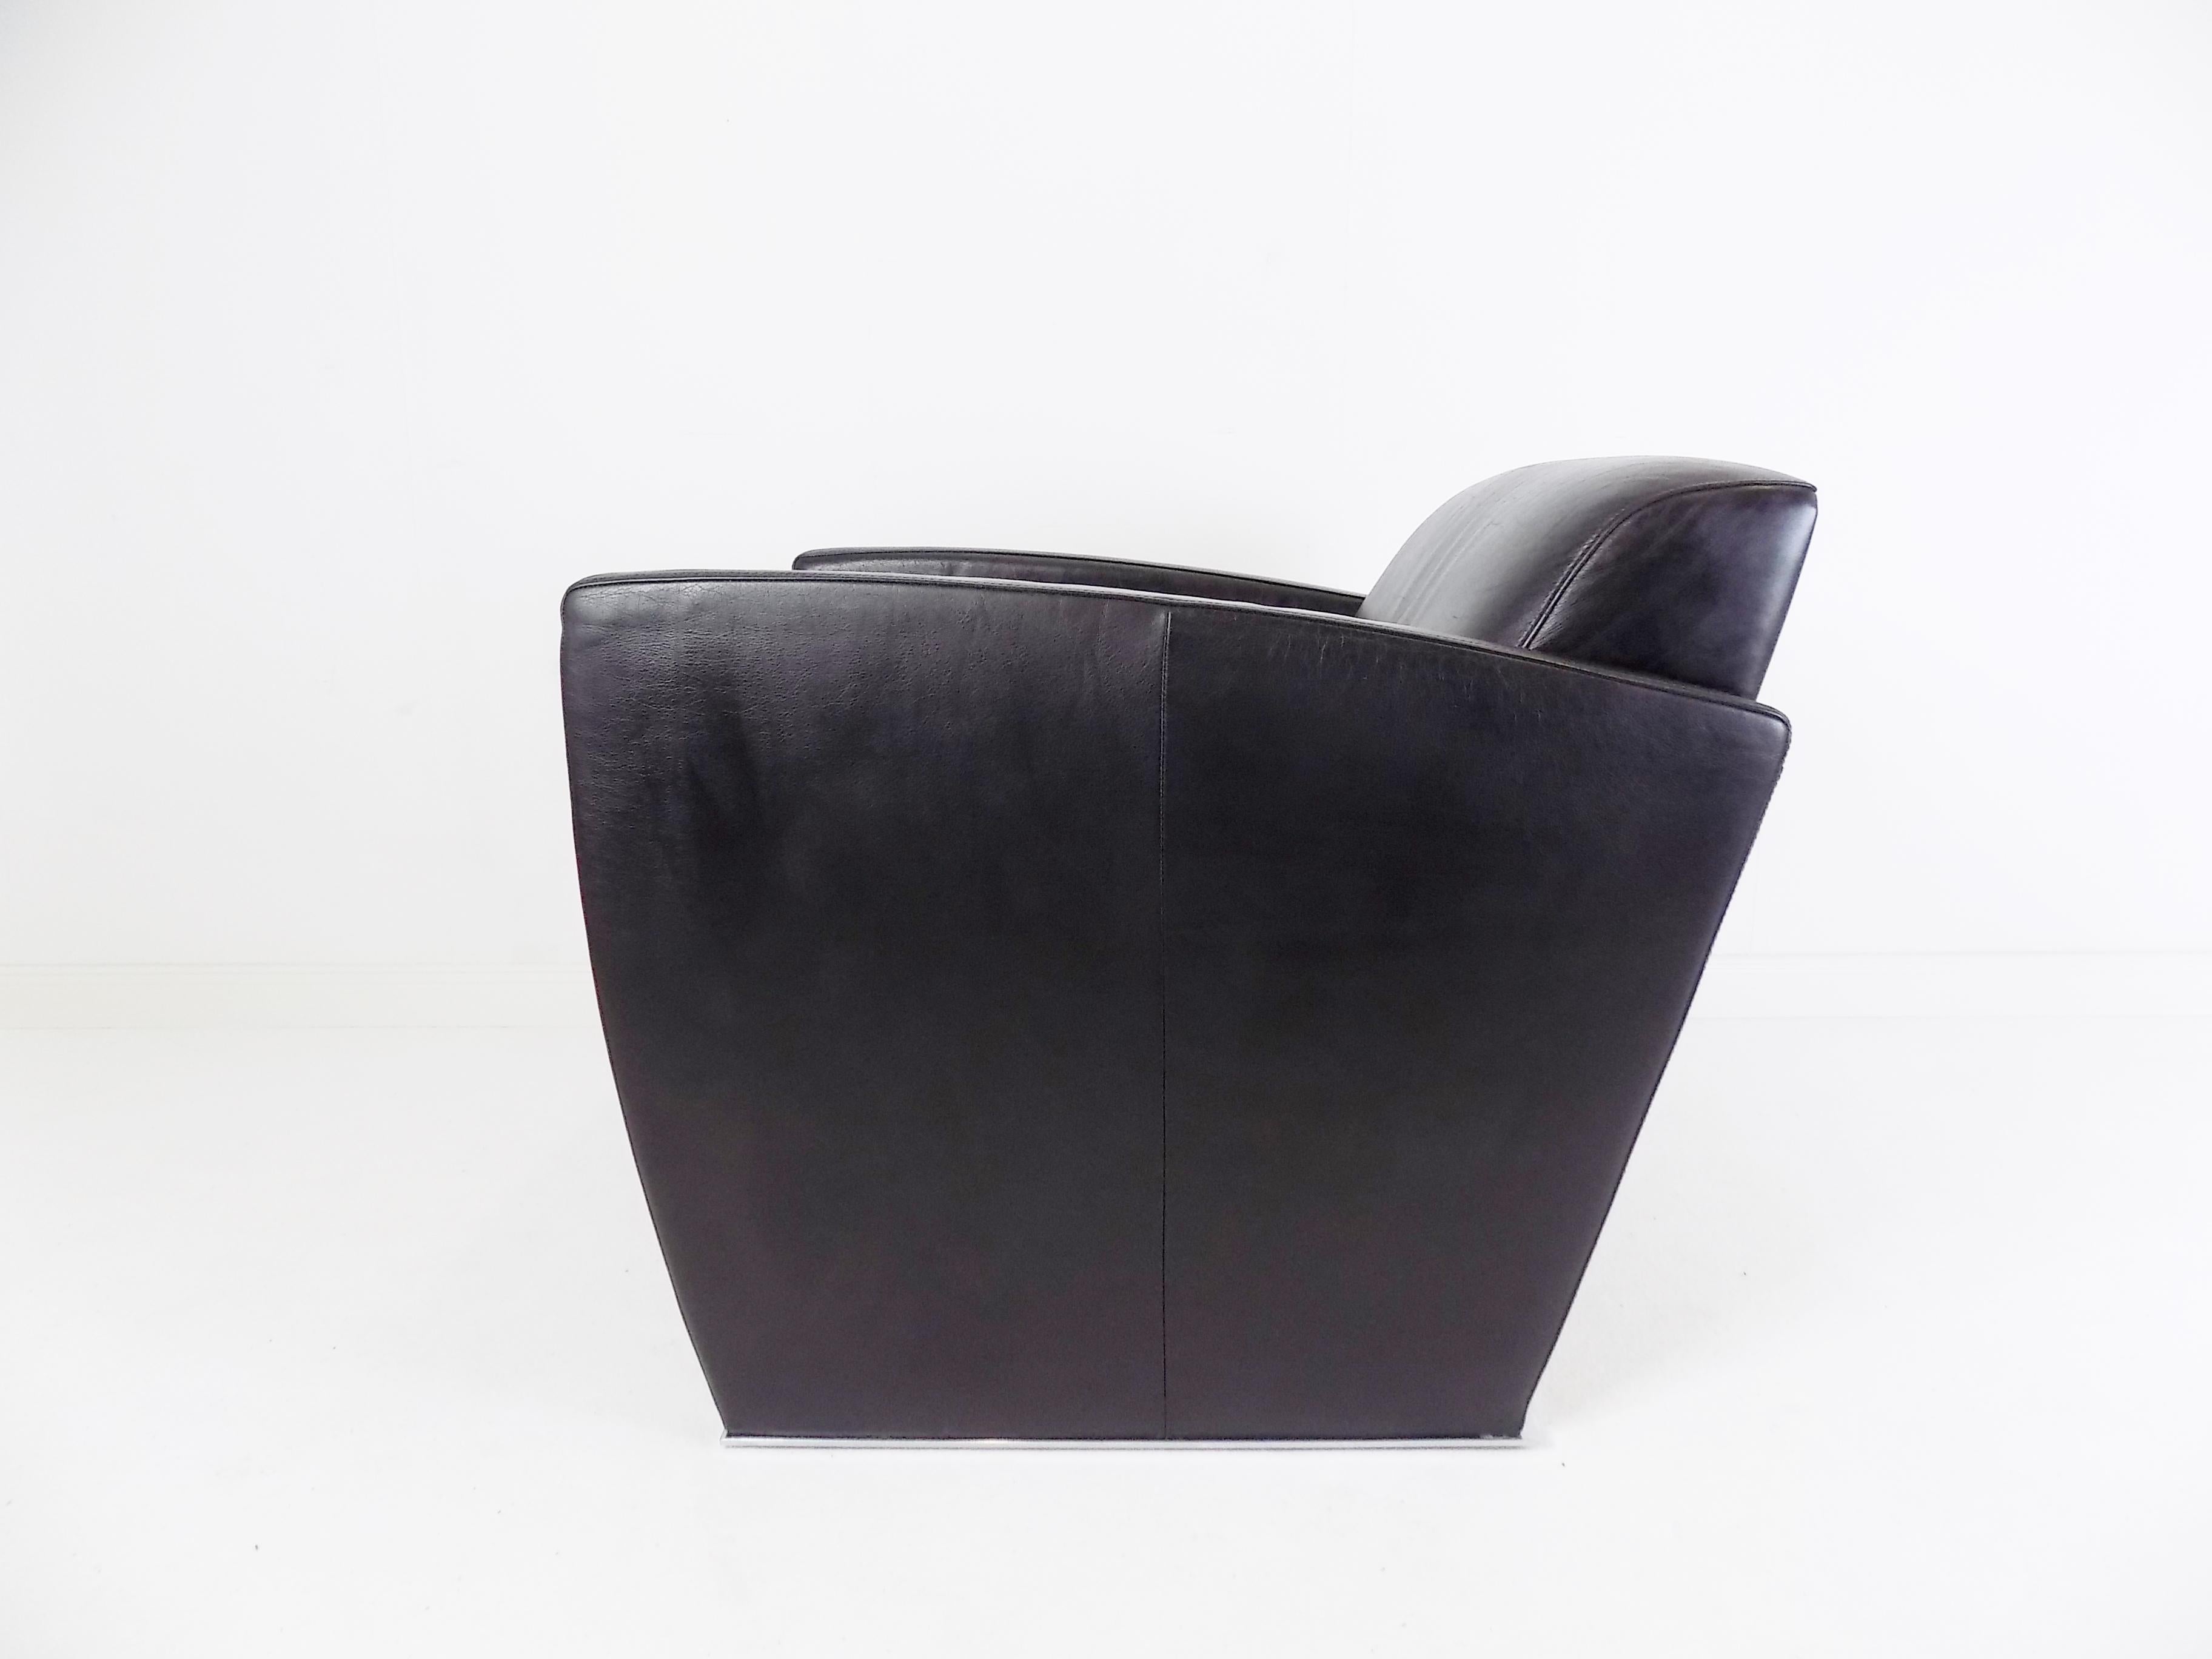 The black DS 420 leather club chair is in excellent condition. The deep black leather shows minimal signs of wear, the seating comfort is impeccable. The model DS 420 was conceived by Jean-Pierre Dovat in the 90 years as an open construction. This